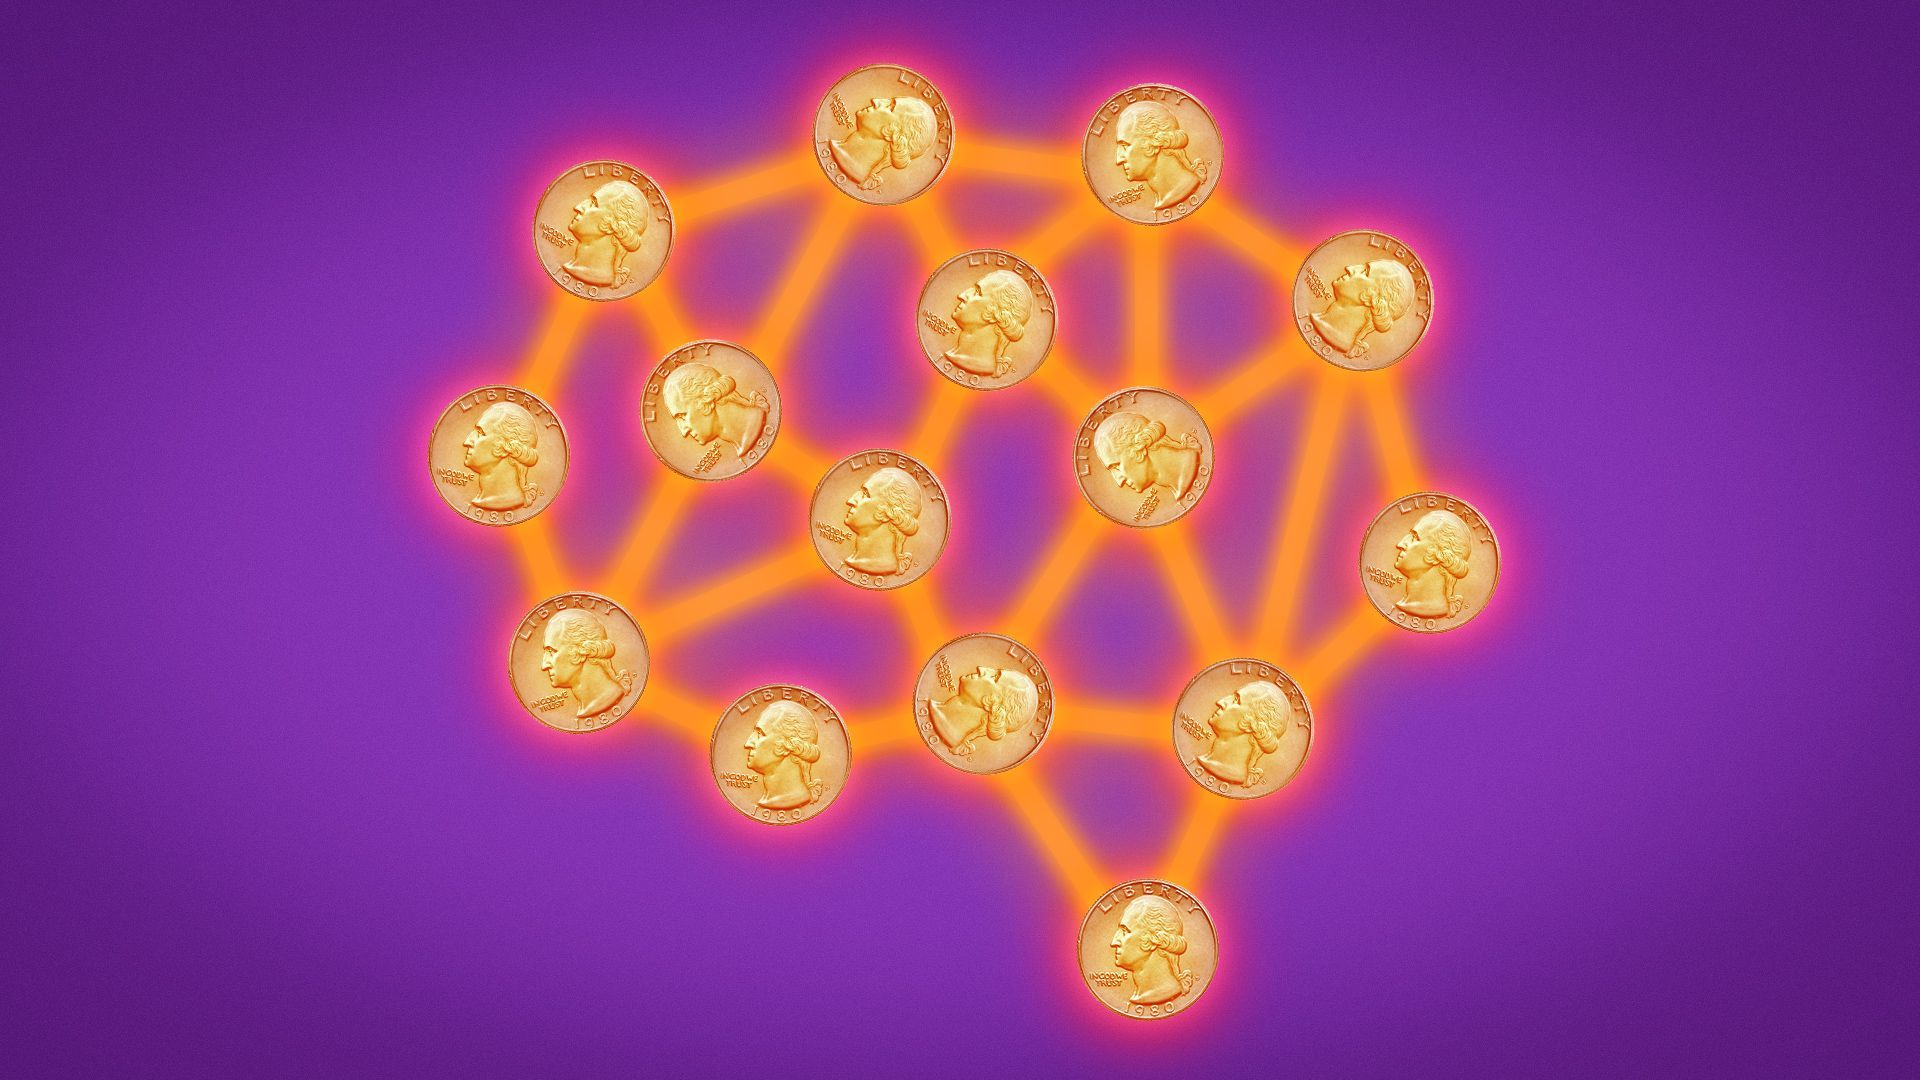 Illustration of a brain made out of glowing lines and nodules composed of quarters. 